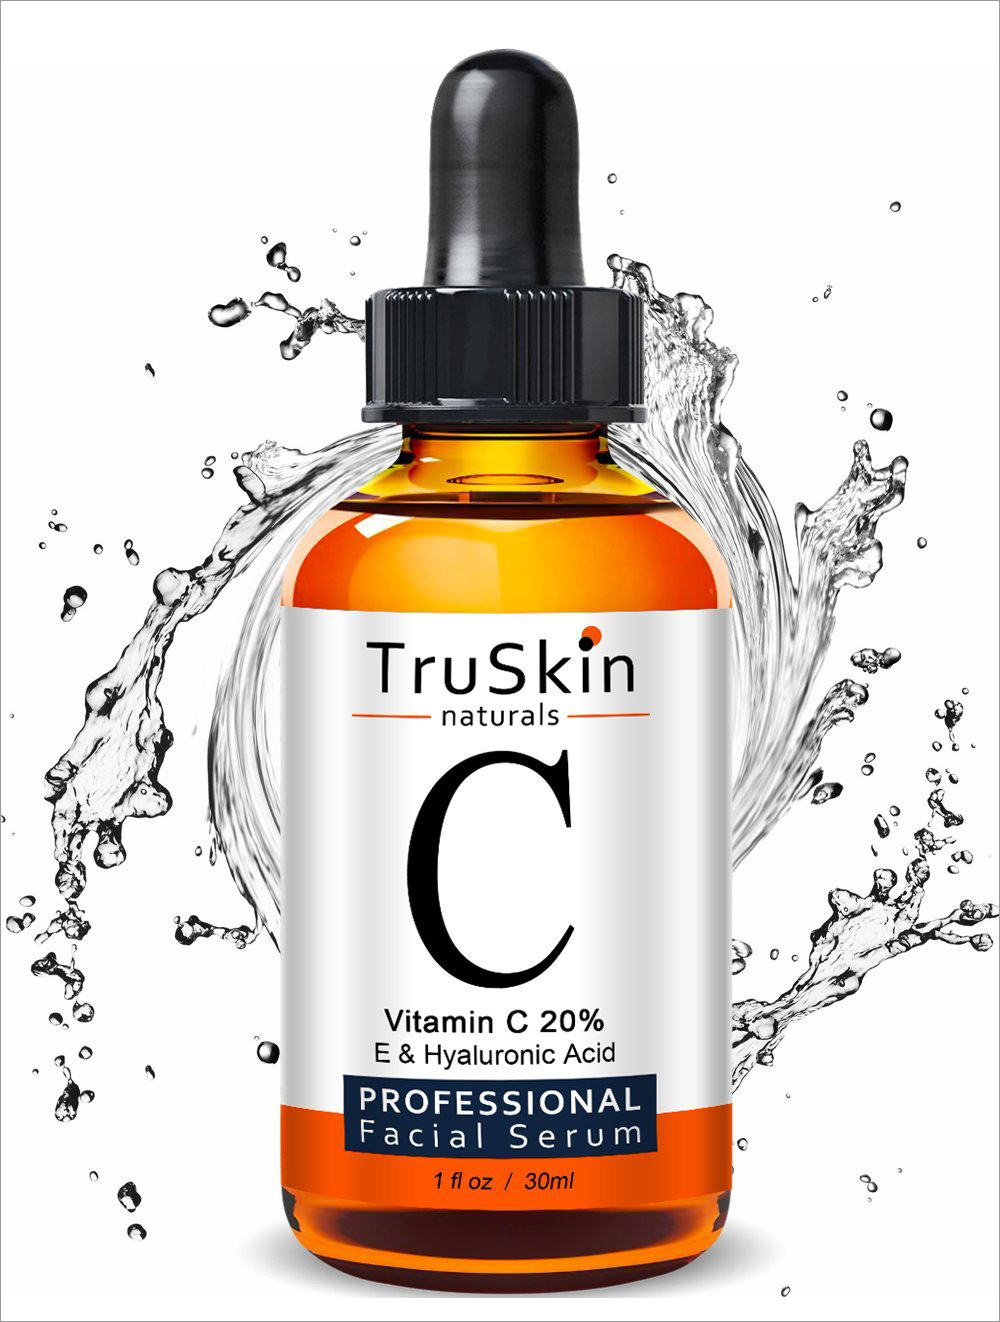 TruSkin Naturals Vitamin C Serum - #1 Amazon Best Seller in the Facial Serums category. An organic anti-aging wrinkle treatment